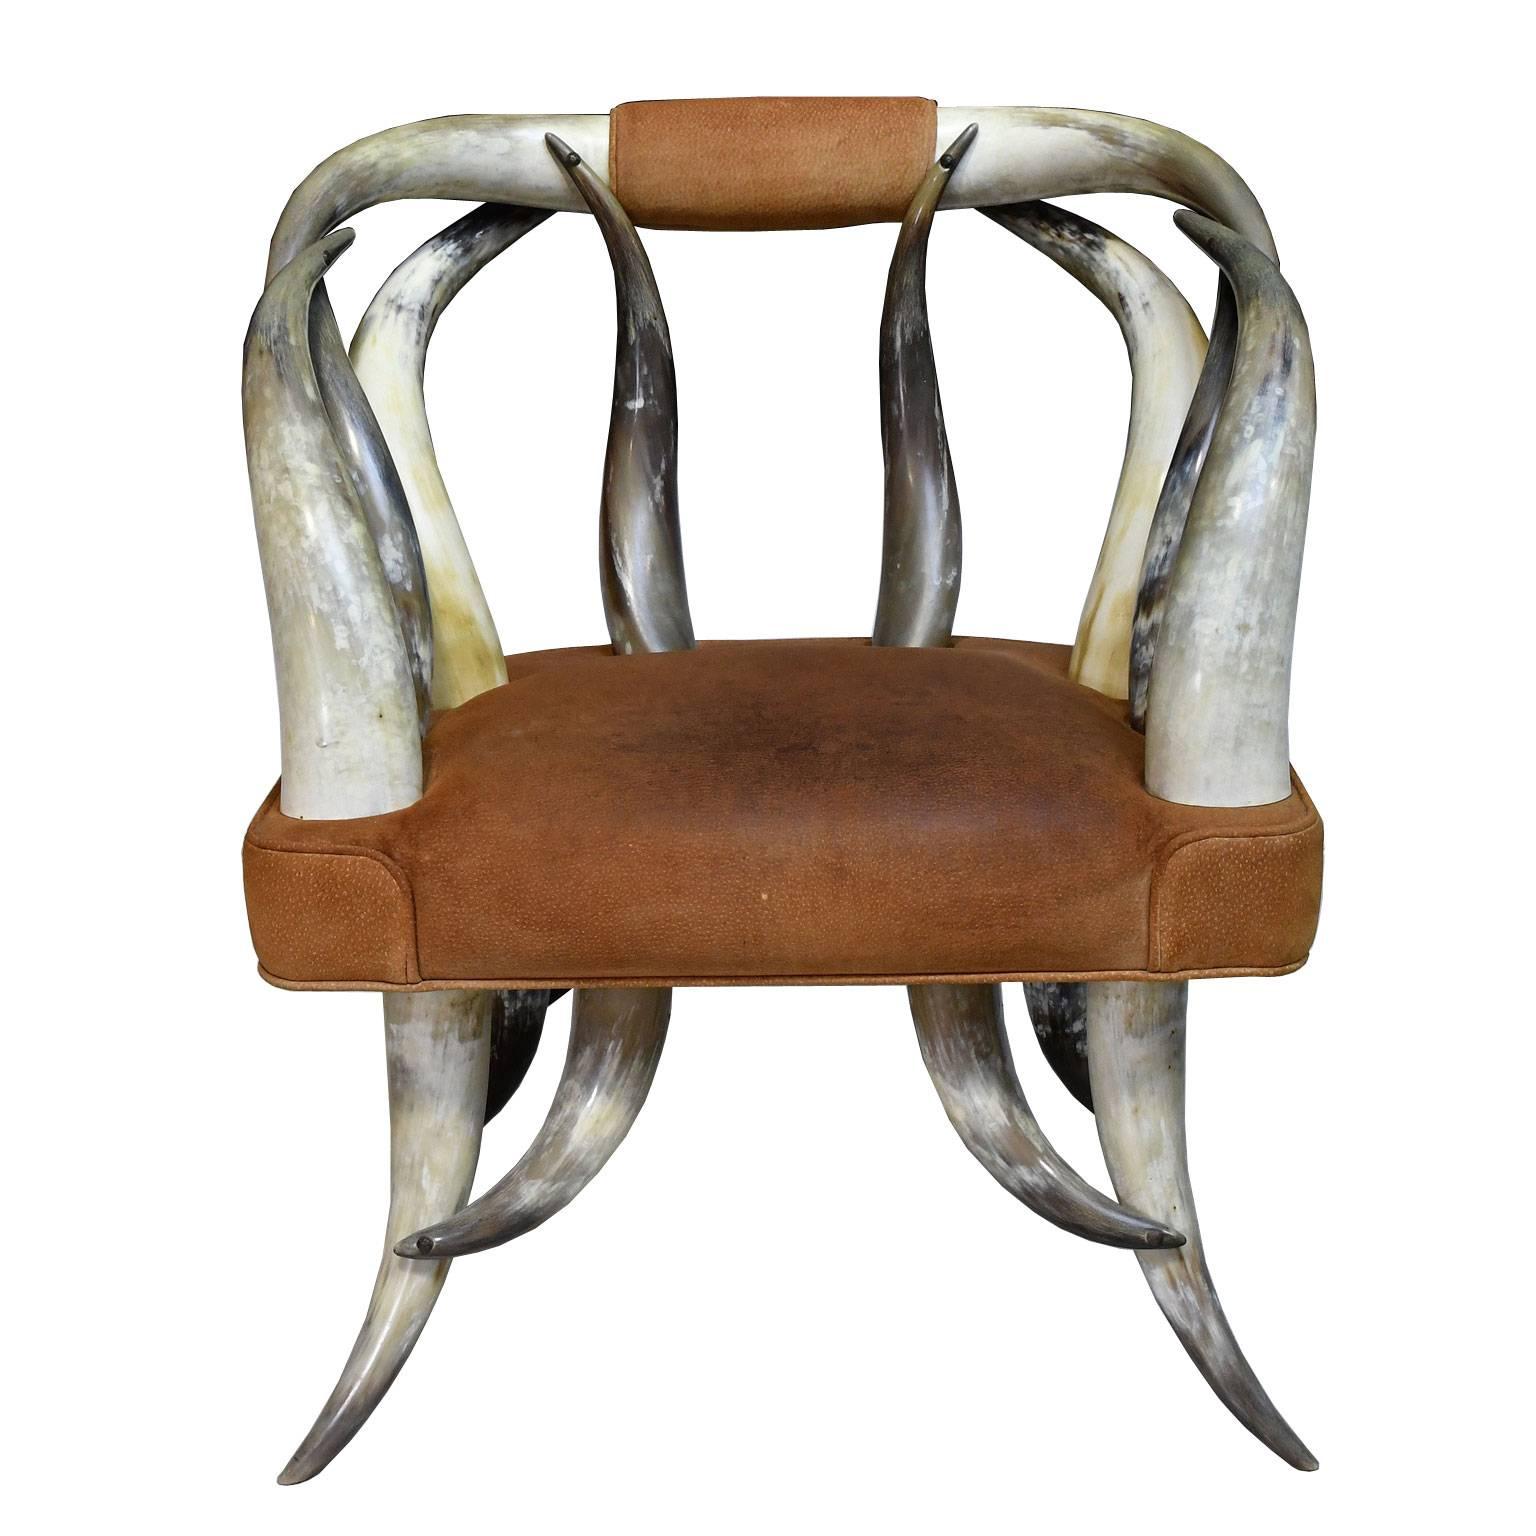 A captivating chair composed of symmetrically-placed horns from Texas long-Horn steer which form the back, sides & leg supports, with a wide seat upholstered in leather that is original. The horns have been matched perfectly for color and size,